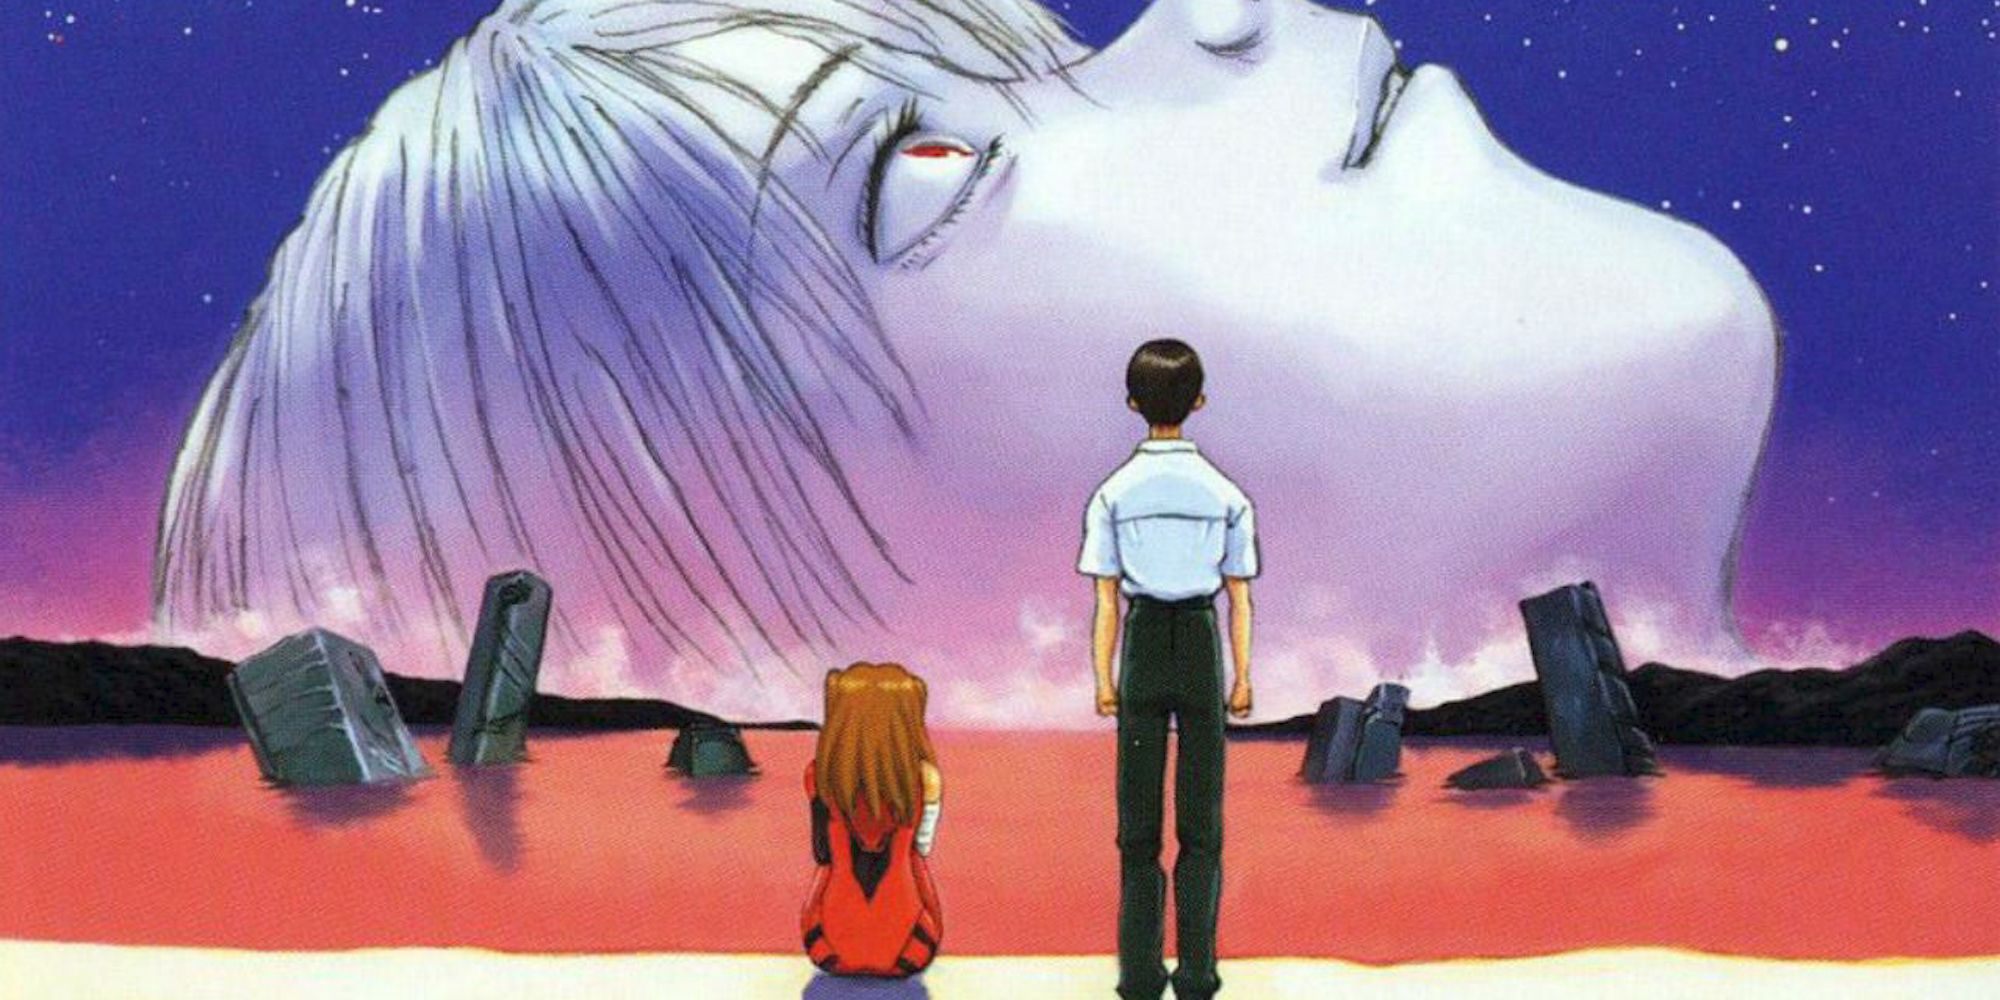 Shinji and Asuka look over a red body of water as a large face fills the night sky in Neon Genesis Evangelion: The End of Evangelion